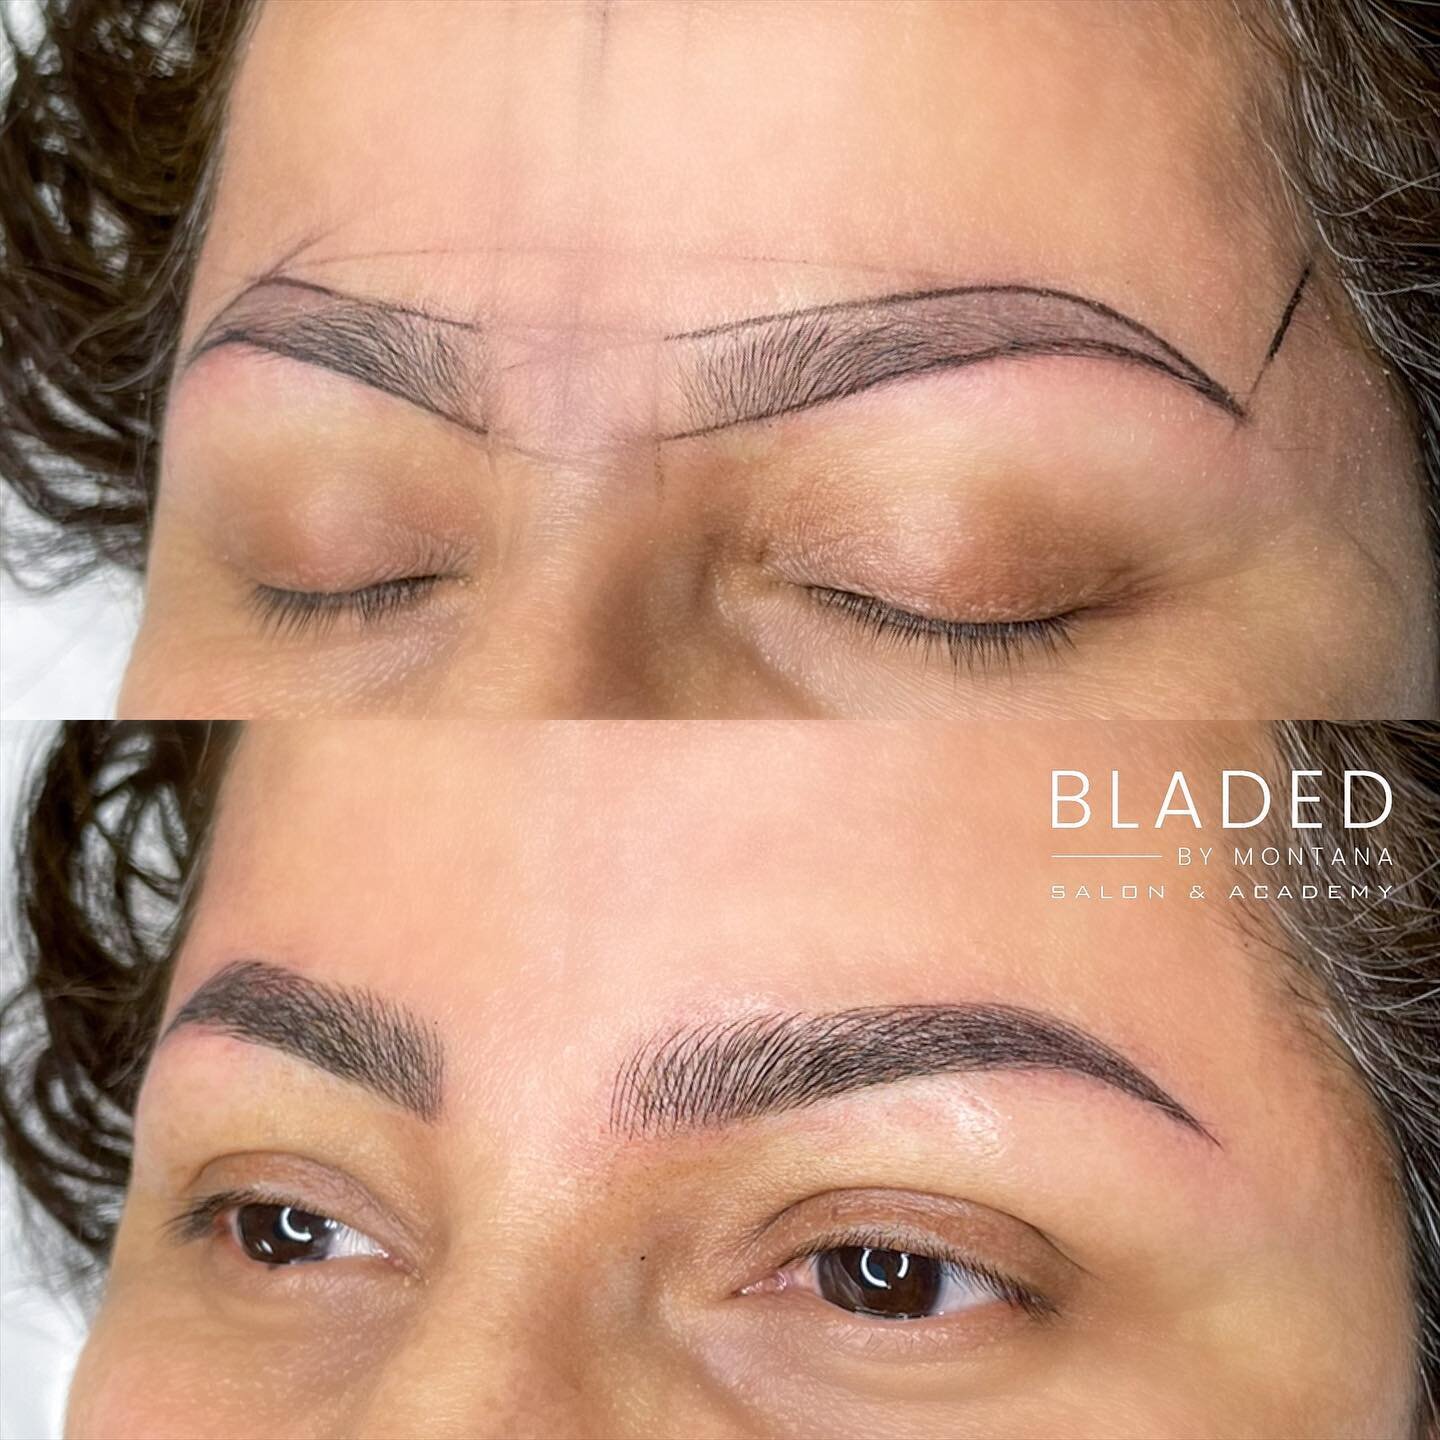 Combination brows⚡️ for the most perfect natural look with a little added density!

@browdaddy pigments in Brouge &amp; Tokyo Black💥

__________________________________________________

&bull;𝐏𝐫𝐨𝐜𝐞𝐝𝐮𝐫𝐞 𝐭𝐢𝐦𝐞: 𝟐-𝟑 𝐡𝐨𝐮𝐫𝐬
&bull;𝐀𝐧?